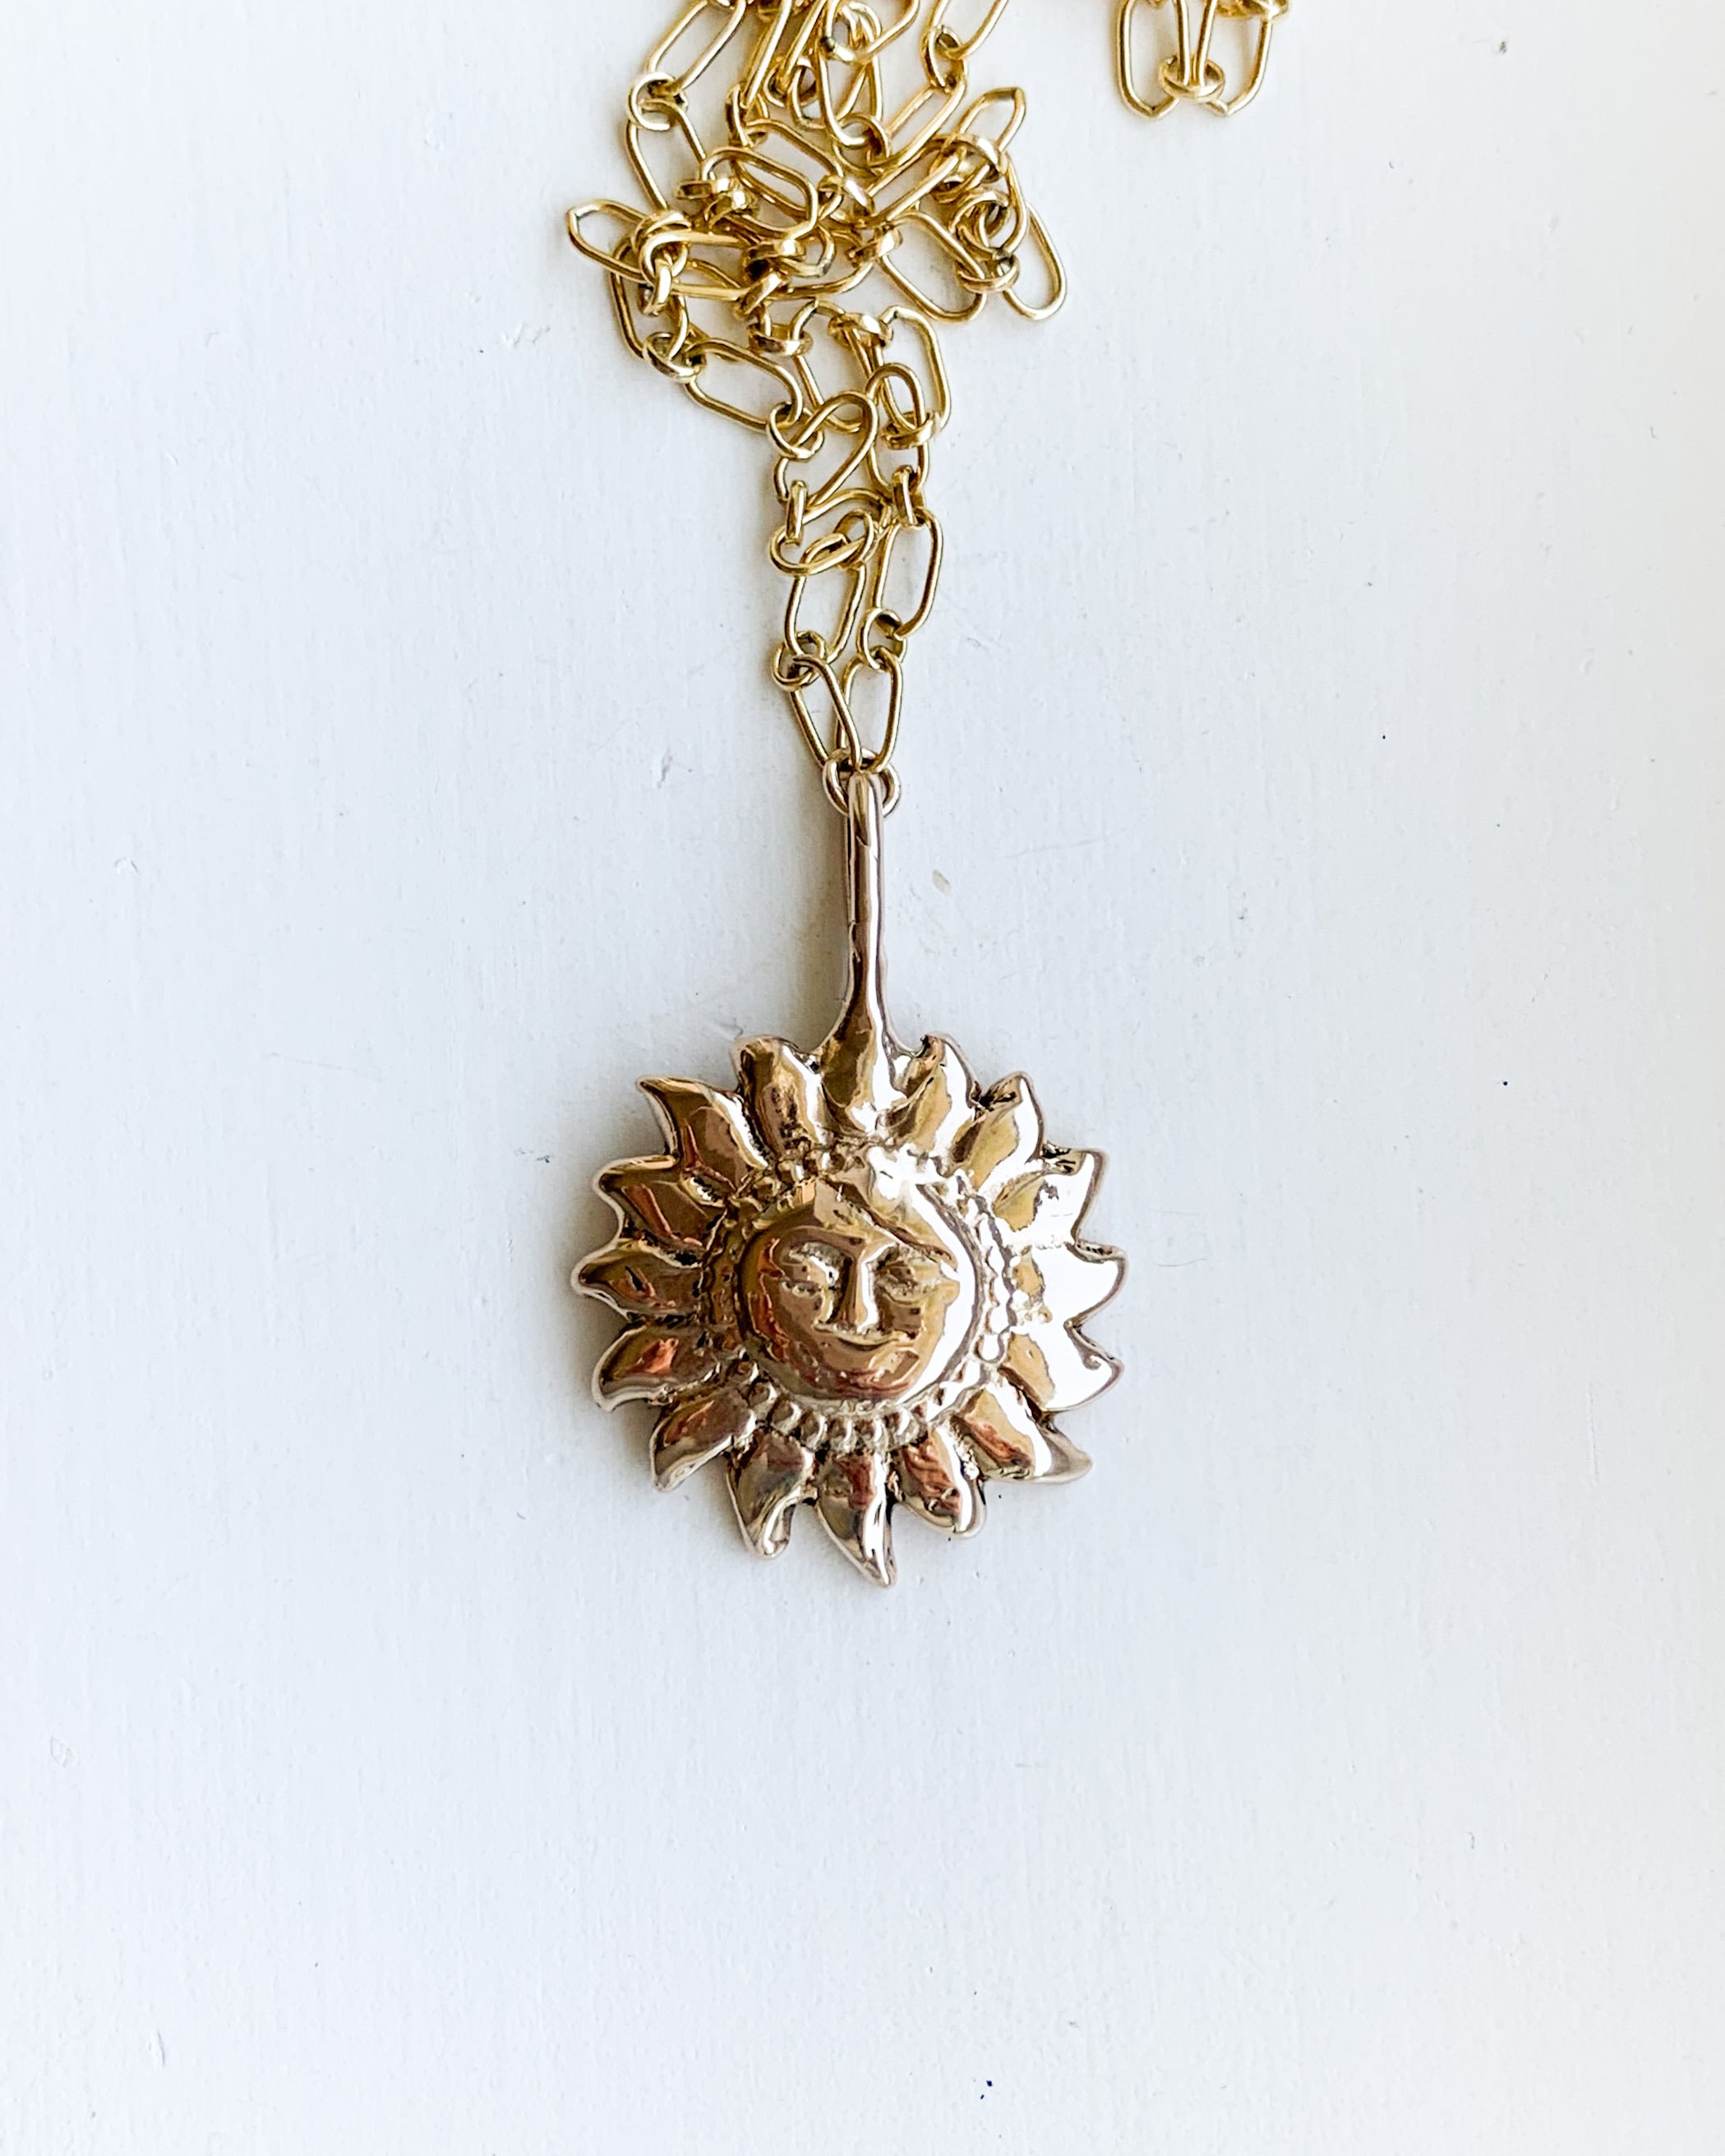 a bronze sun shaped pendant on a gold chain, shown on a white background